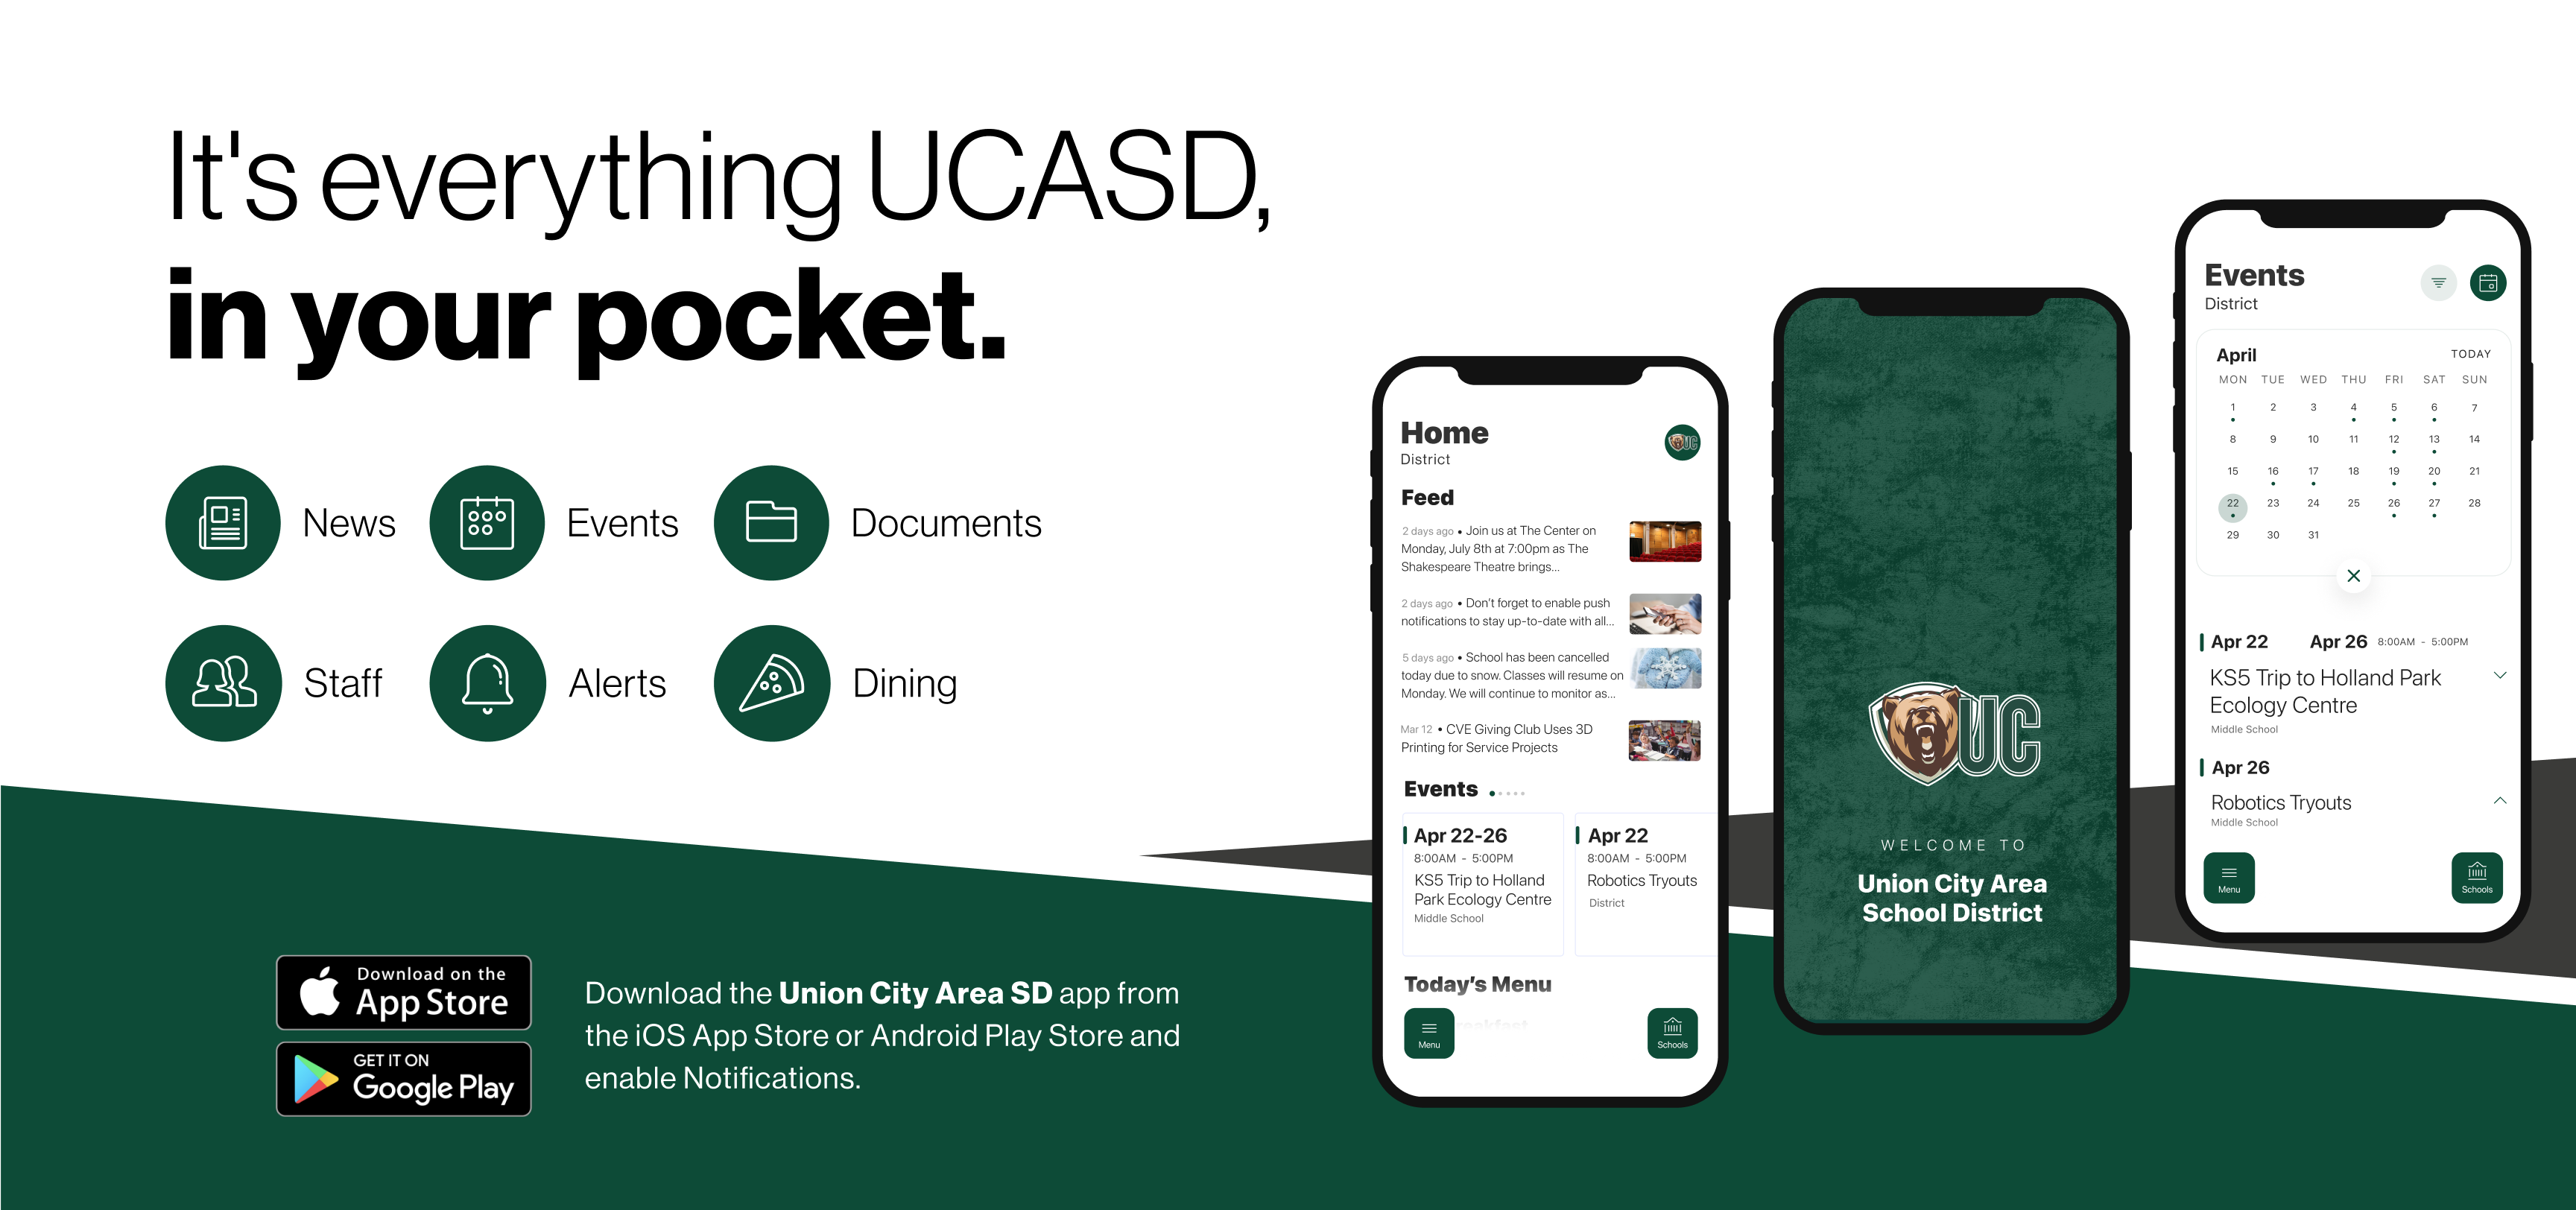 It's everything UCASD in your pocket. News, events, documents, dining, staff, alerts. Download the Union CIty Area SD app from the iOS app store or android play store and enable notifications.